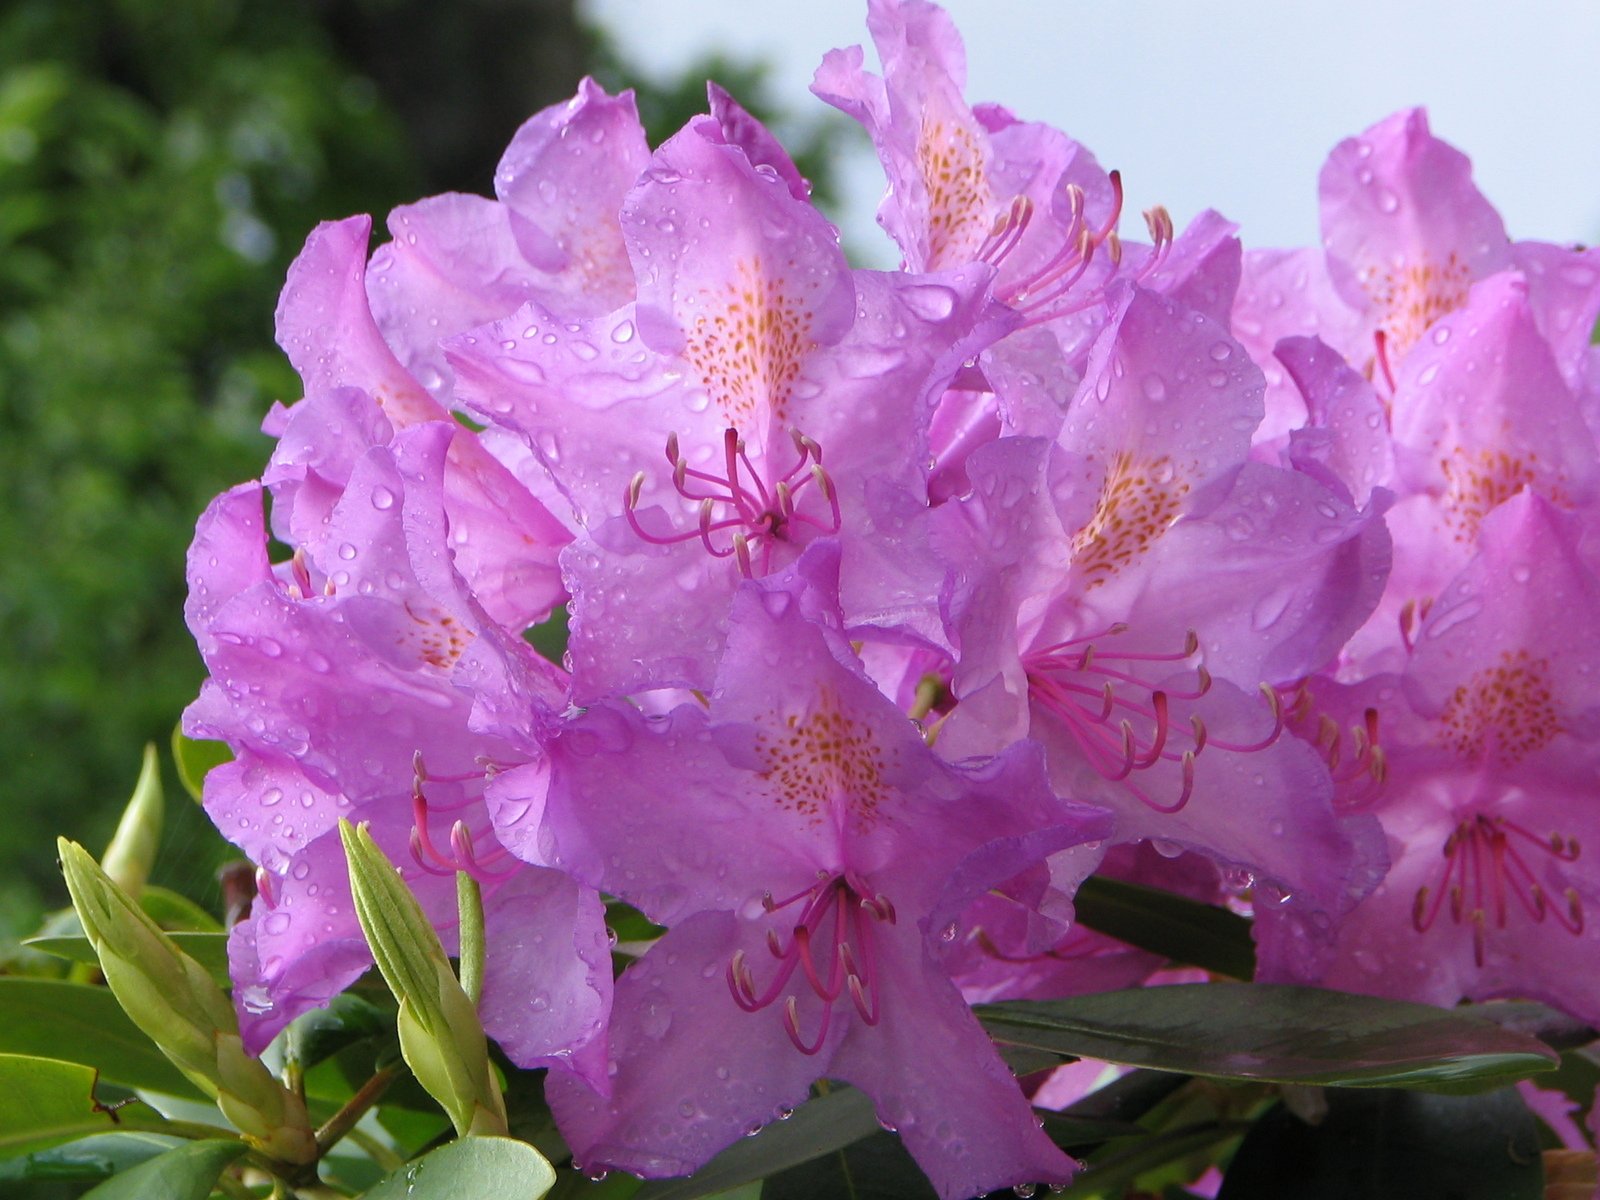 pink flowers with water droplets on them against a blue sky